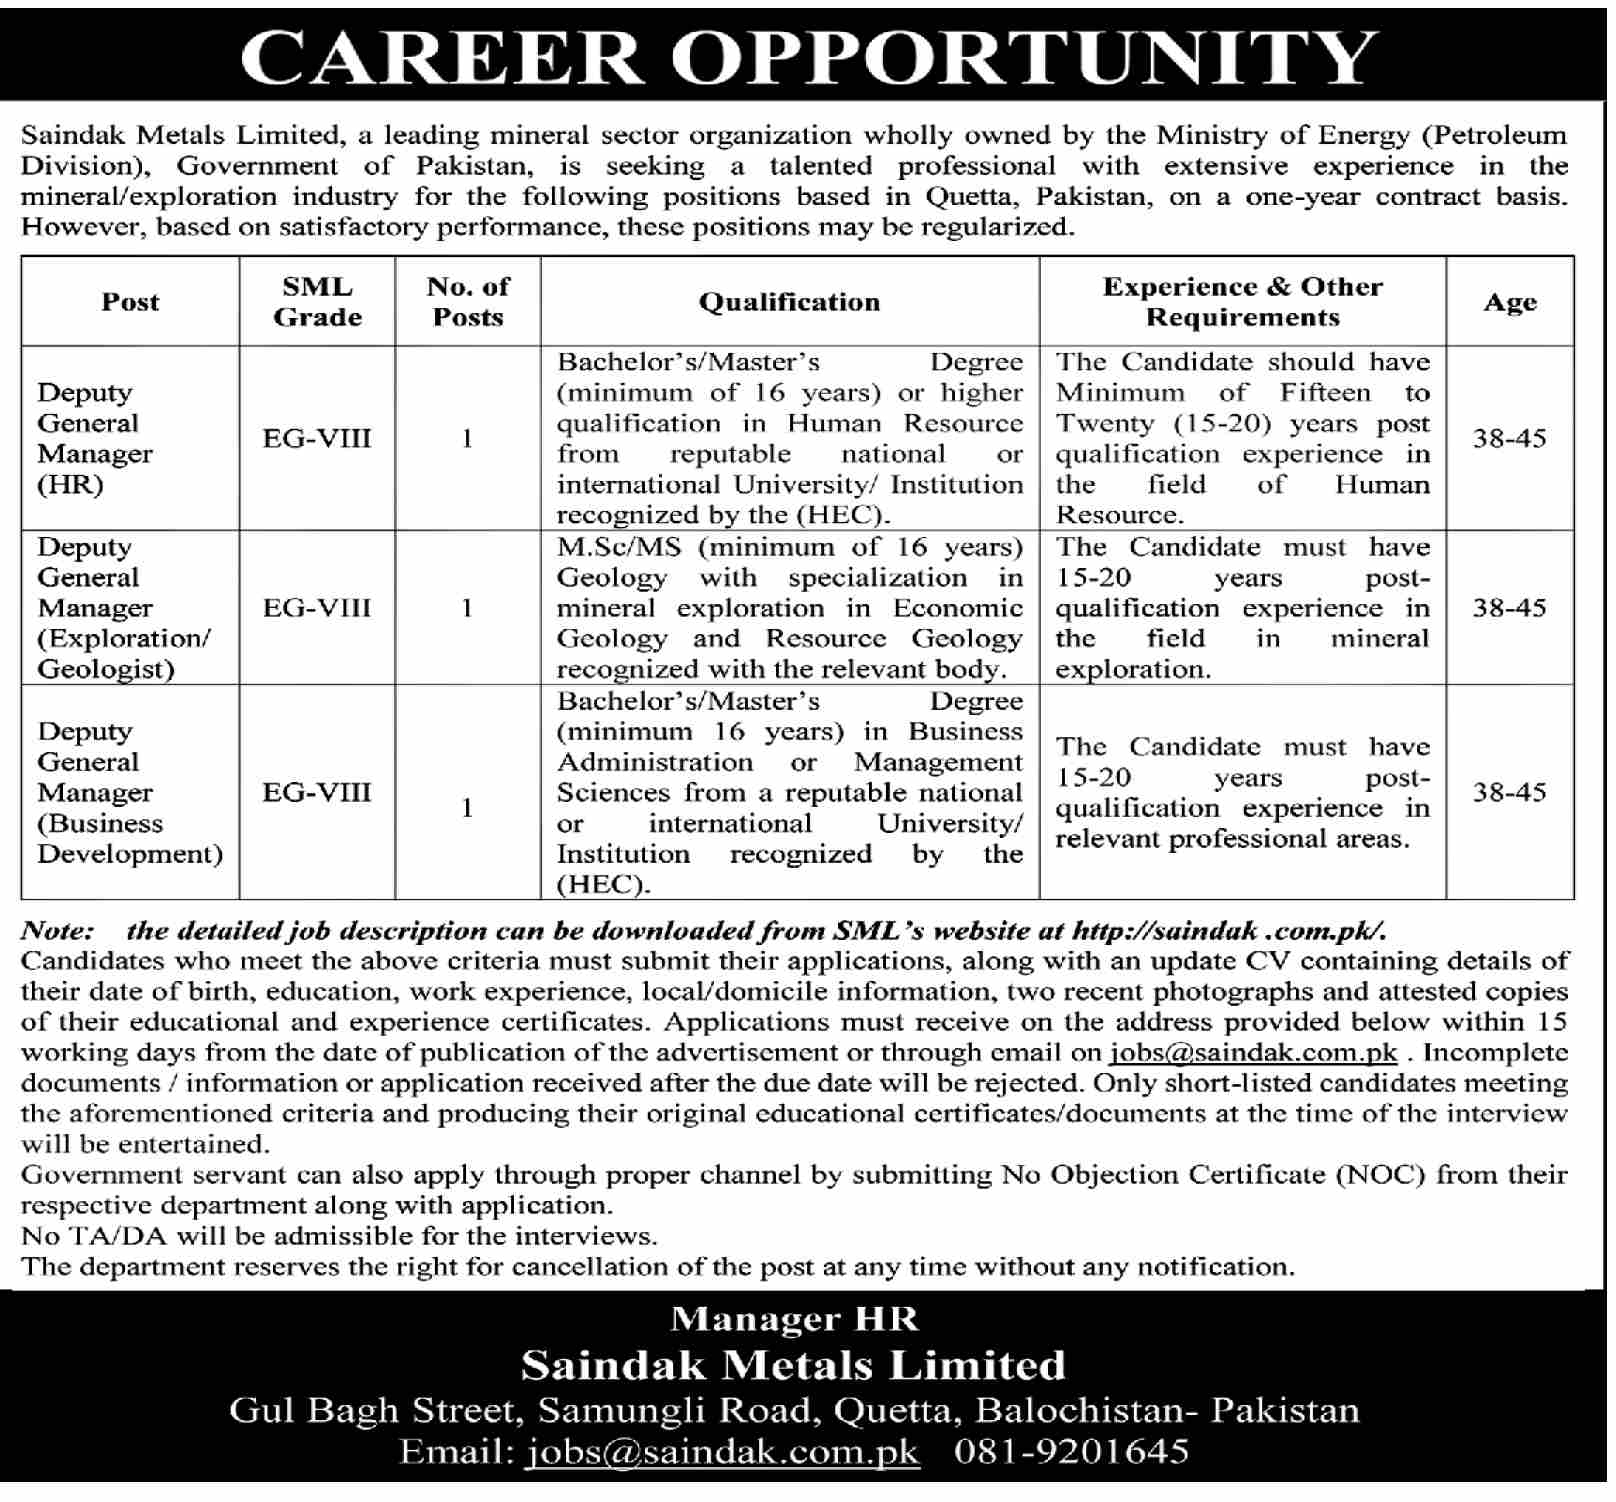 Jobs in Saindak Metals Limited Ministry of Energy Petroleum Division Government of Pakistan